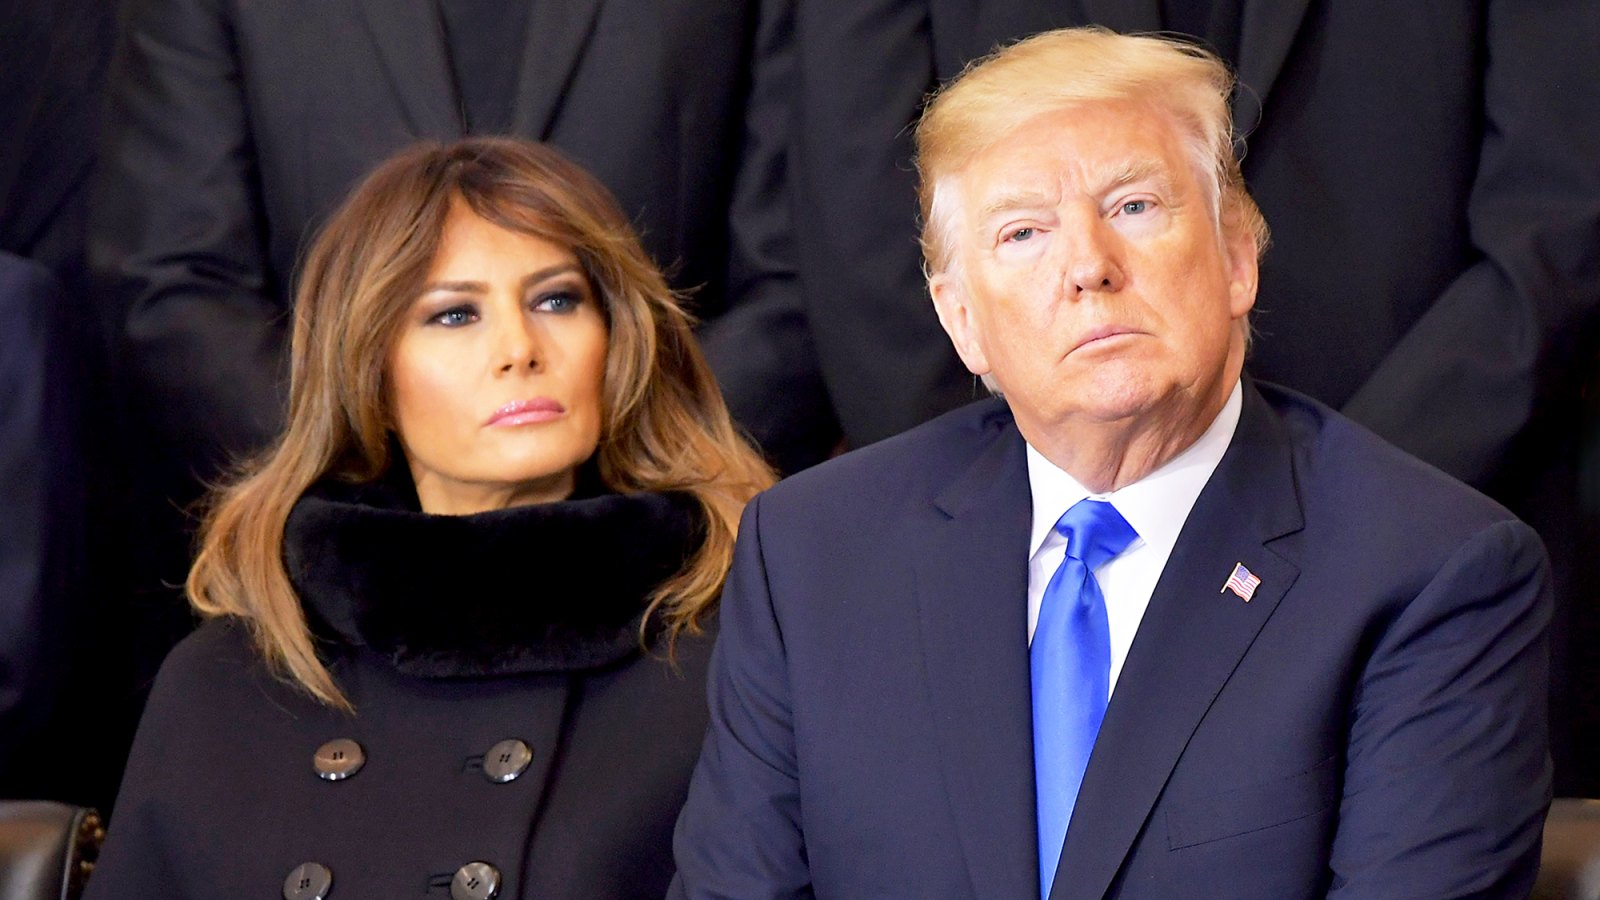 Donald Trump and Melania Trump attend the memorial service for Reverend Billy Graham in the Rotunda of the U.S. Capitol on February 28, 2018 in Washington, DC.